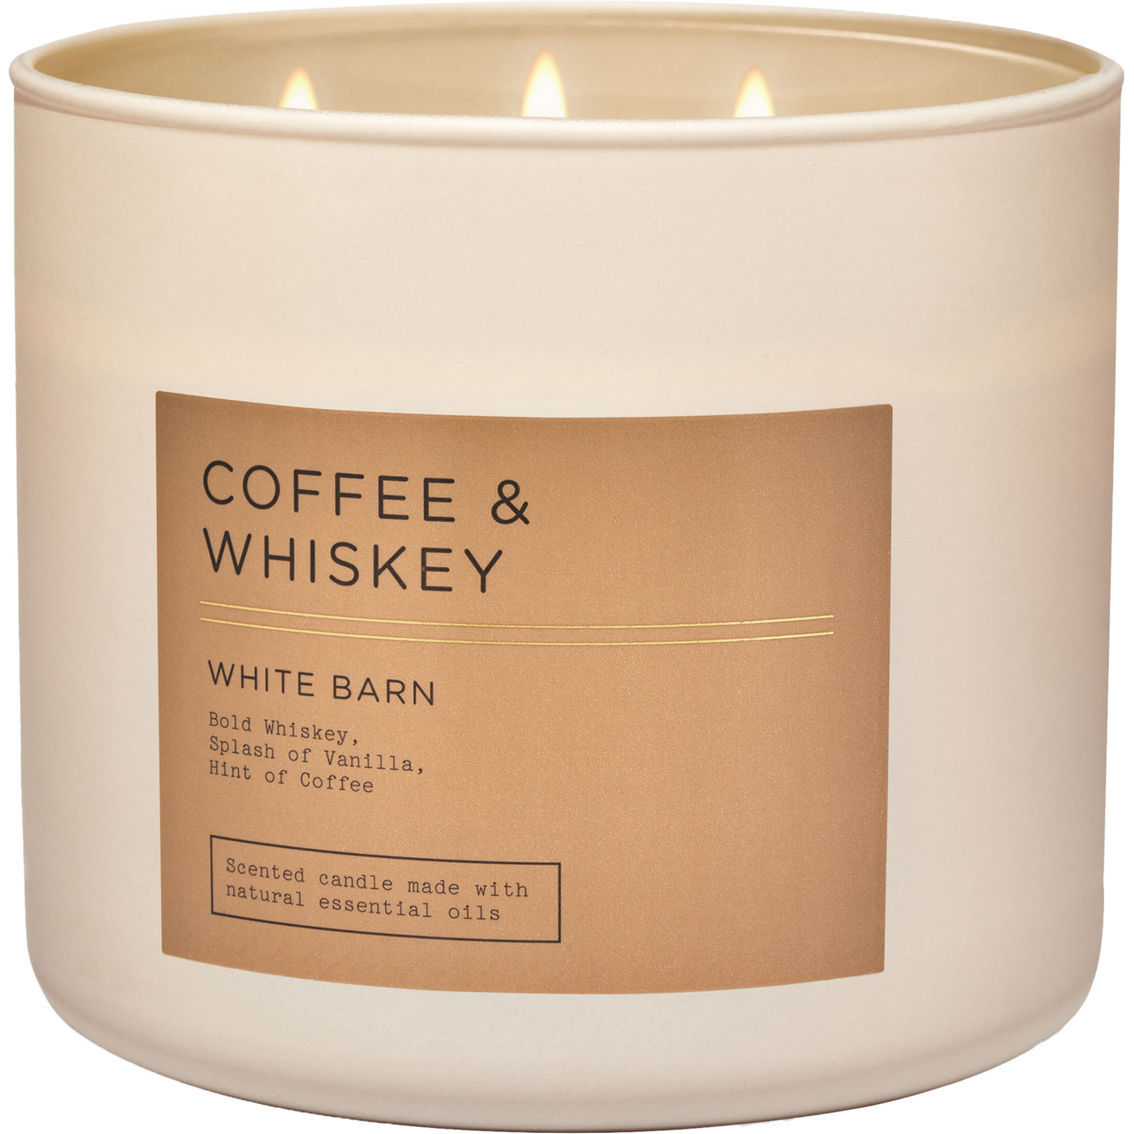 Bath & Body Works Champagne Toast 3-Wick Candle Reviews 2024